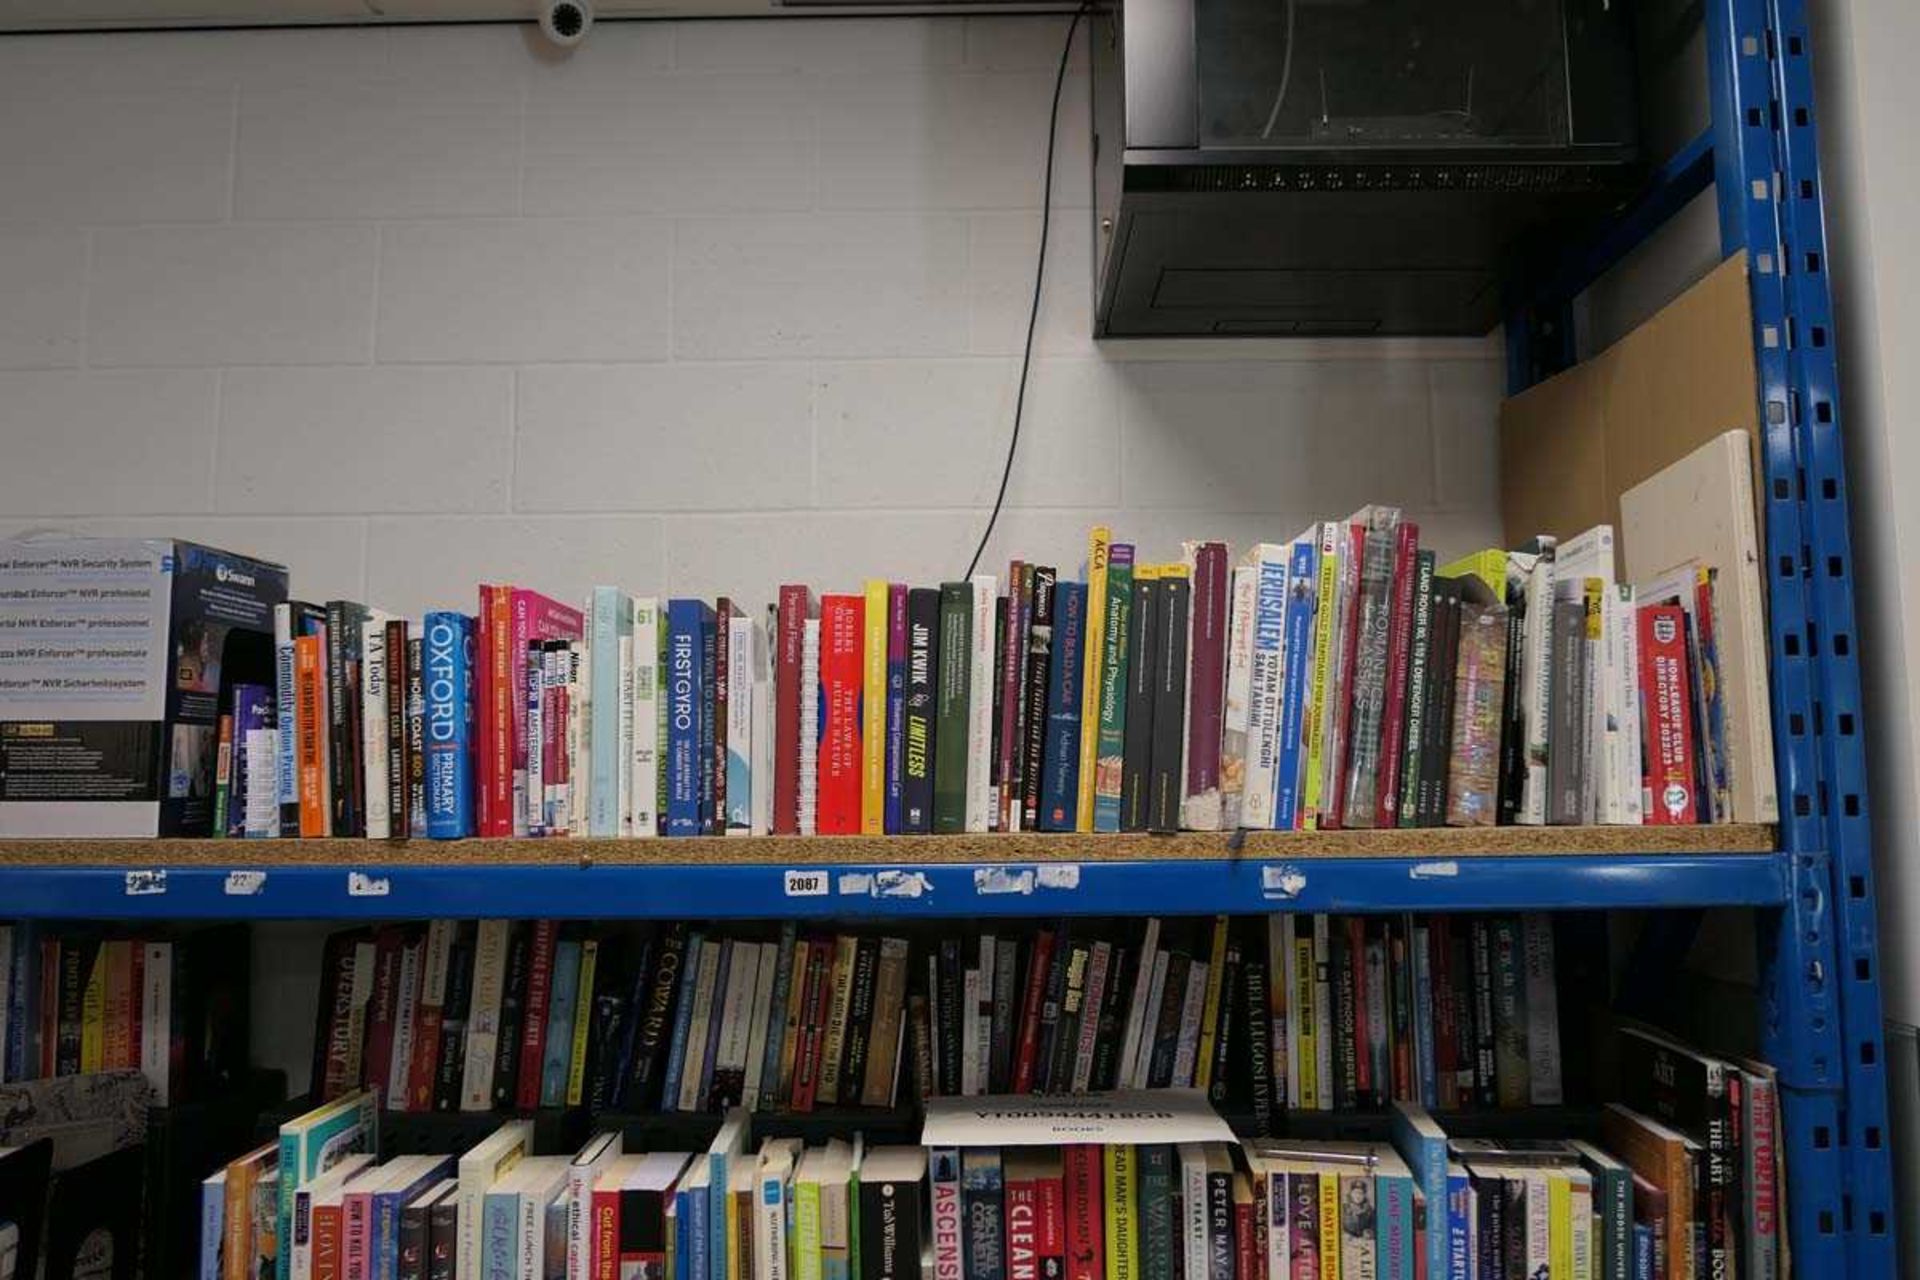 Selection of reference material books including various publishers: Pearson, Oxford, Harper Collins,